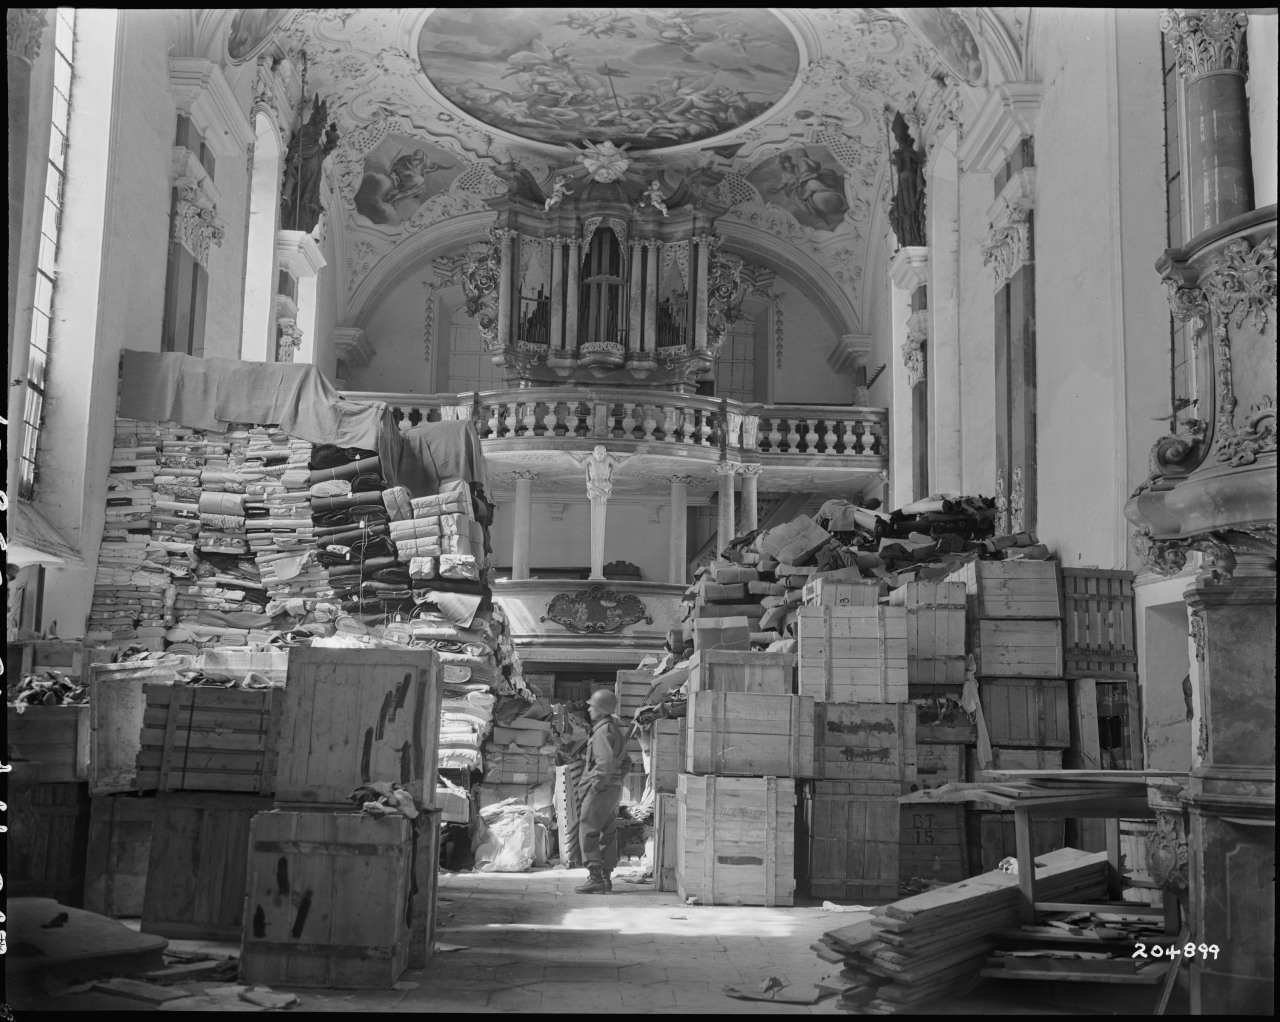 todaysdocument:
“Who were the Real Monuments Men?
“ German loot stored in church at Ellingen, Germany found by troops of the U.S. Third Army. 4/24/45.
”
Can’t make tonight’s The Monuments Men talk with Robert Edsel at the National Archives? (Watch it...